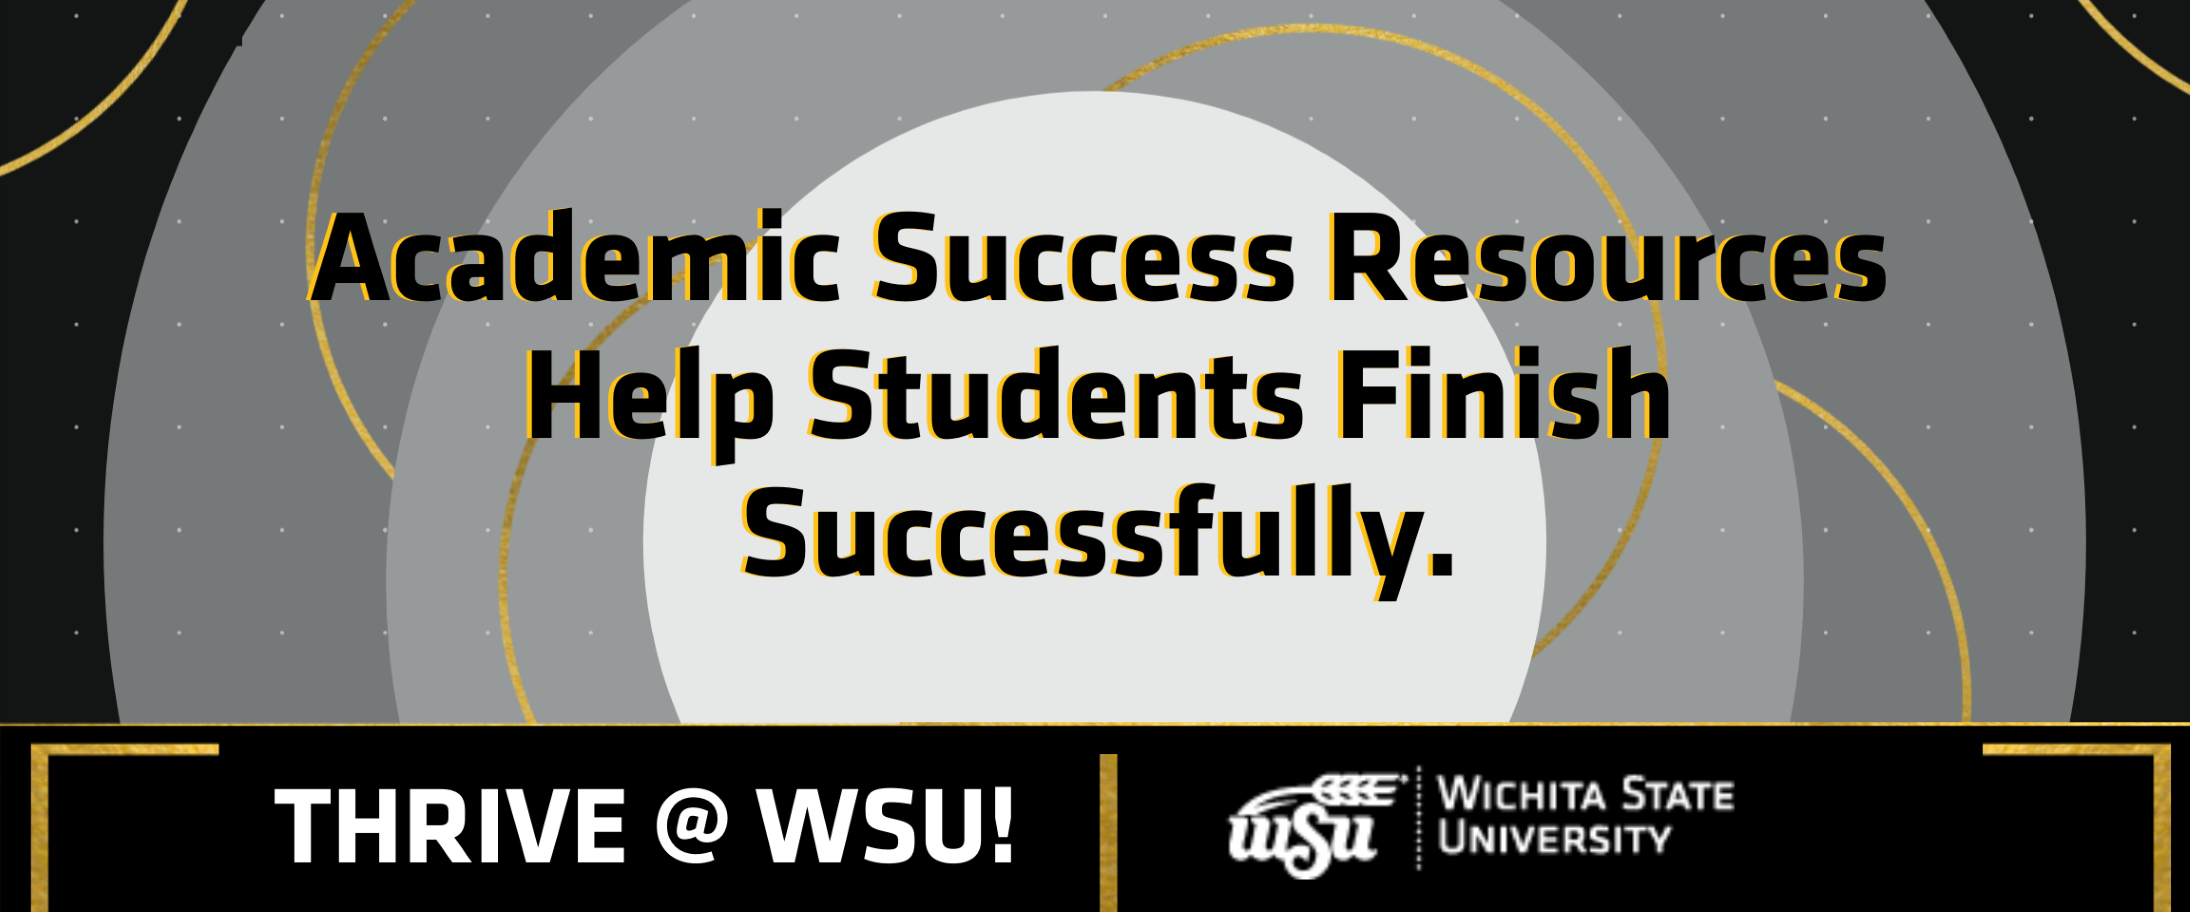 Academic Success Resources Help Students Finish Successfully.